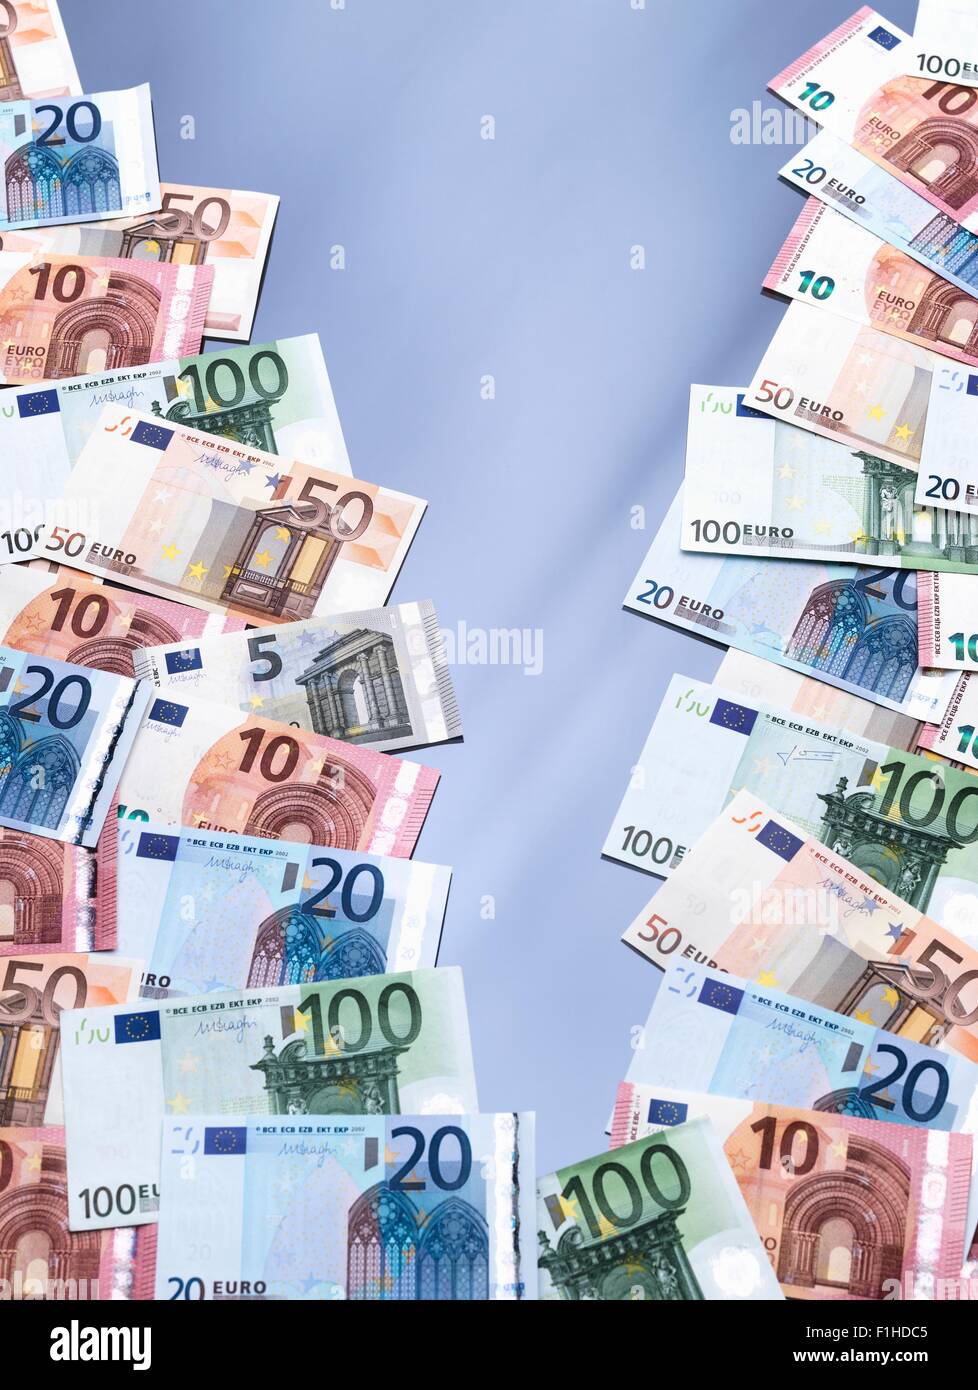 Euro currency notes split into two piles Stock Photo